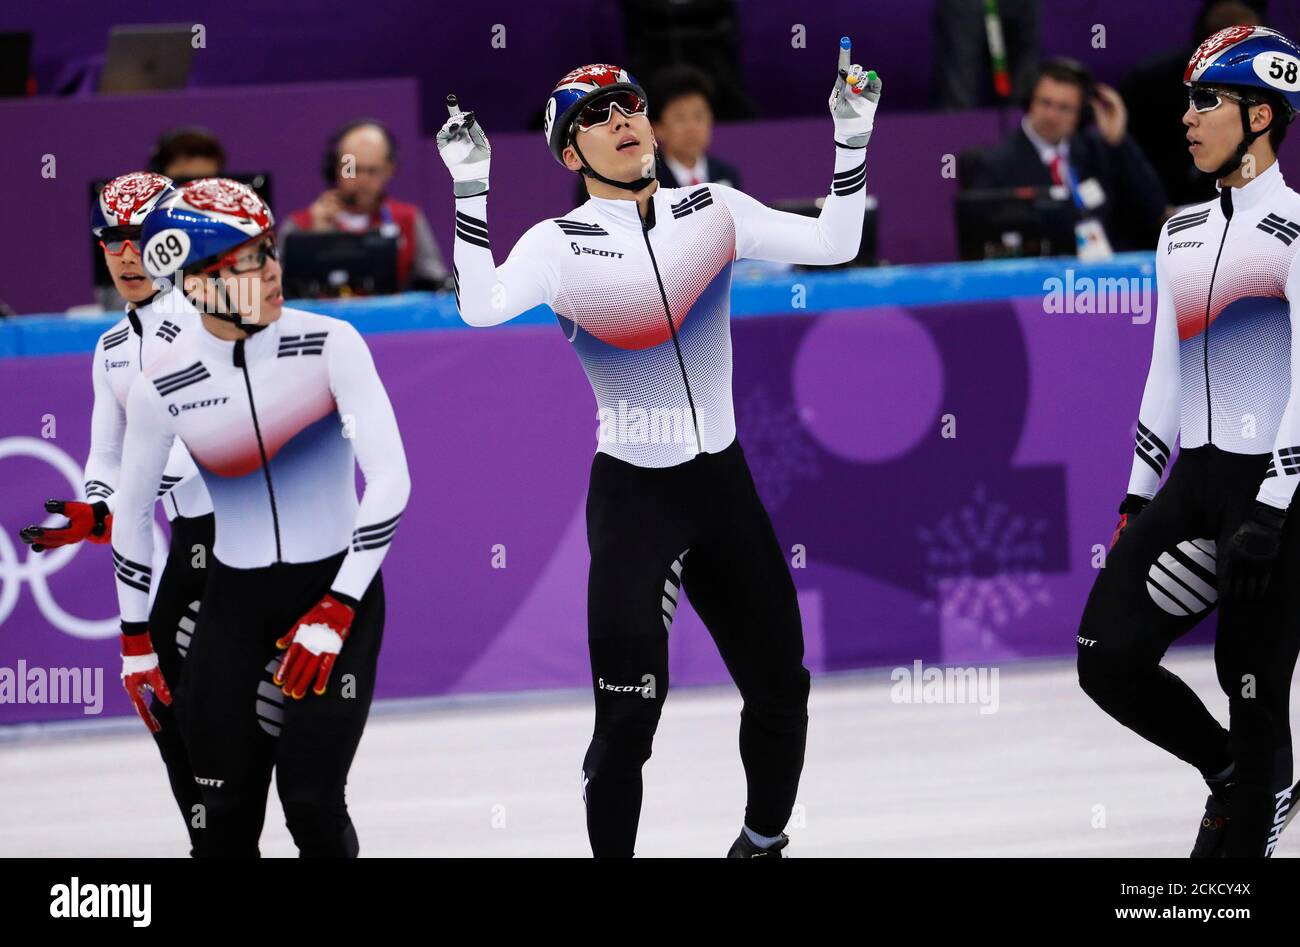 Short Track Speed Skating Events – Pyeongchang 2018 Winter Olympics – Men's  5000m Relay Competition – Gangneung Ice Arena - Gangneung, South Korea –  February 13, 2018 - Kim Dok-youm of South